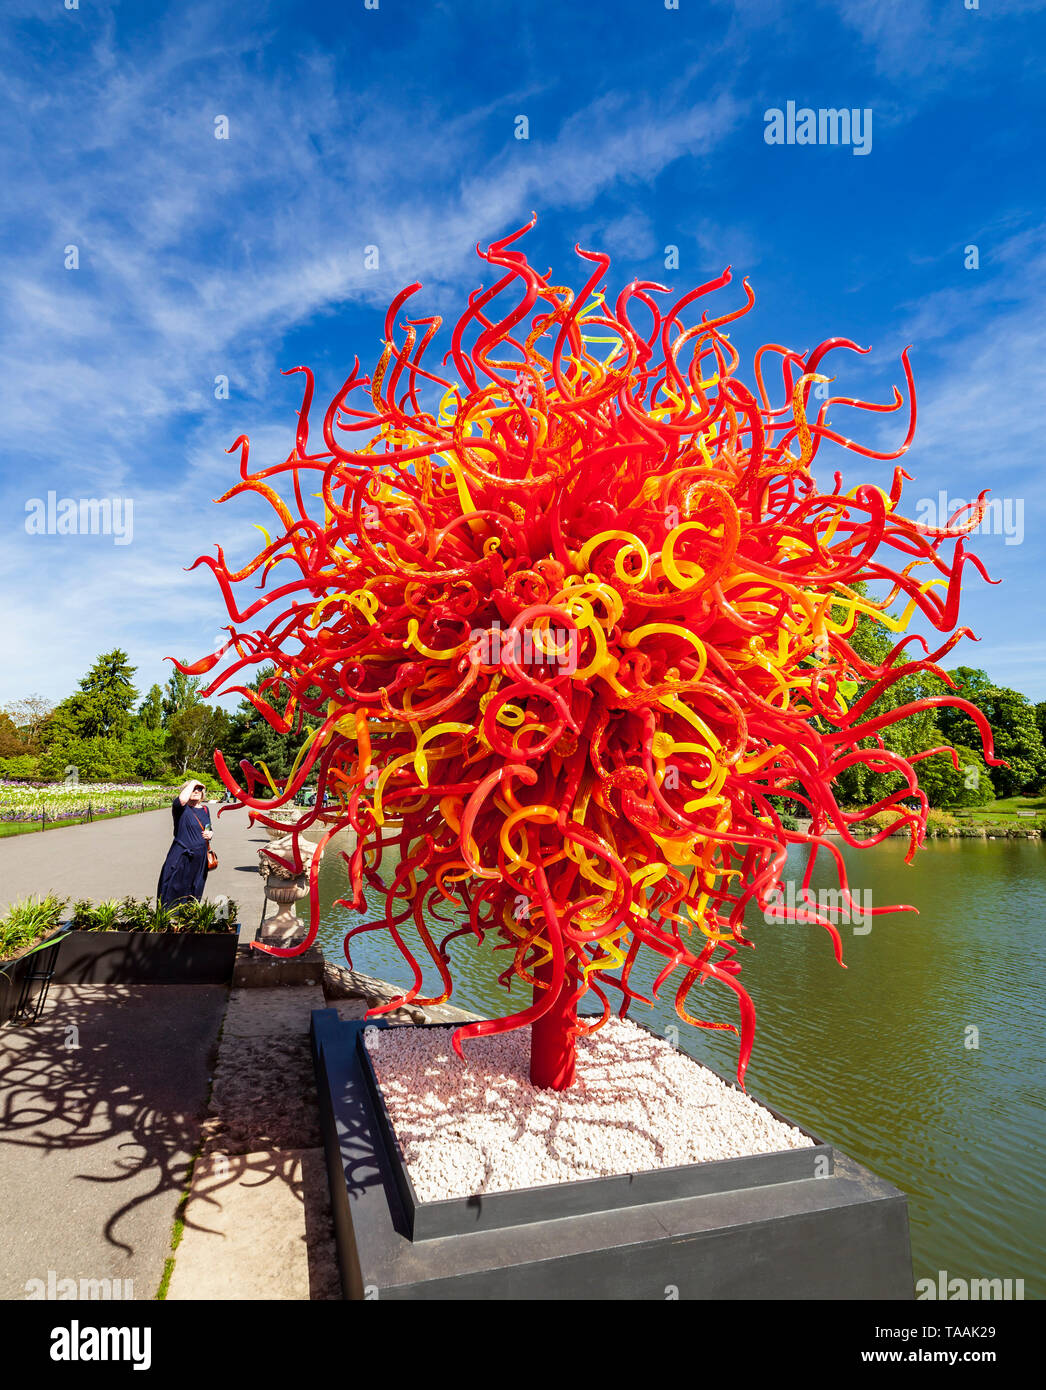 Dale Chihuly glass sculpture called 'Summer Sun' at Kew Gardens. Stock Photo